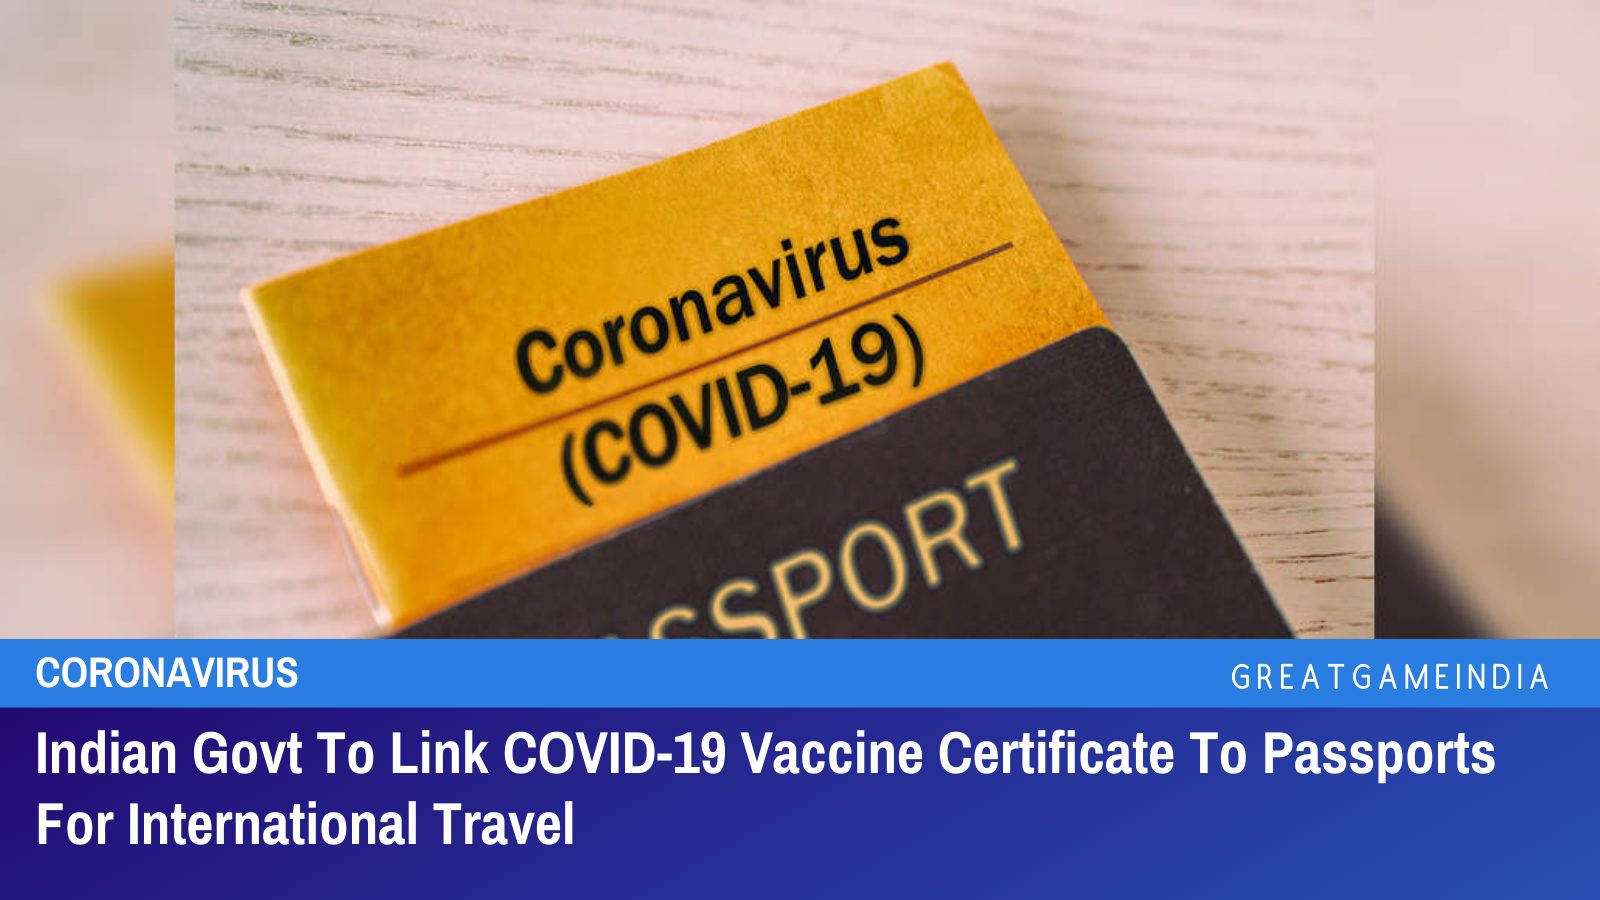 Indian Govt To Link COVID-19 Vaccine Certificate To Passports For International Travel